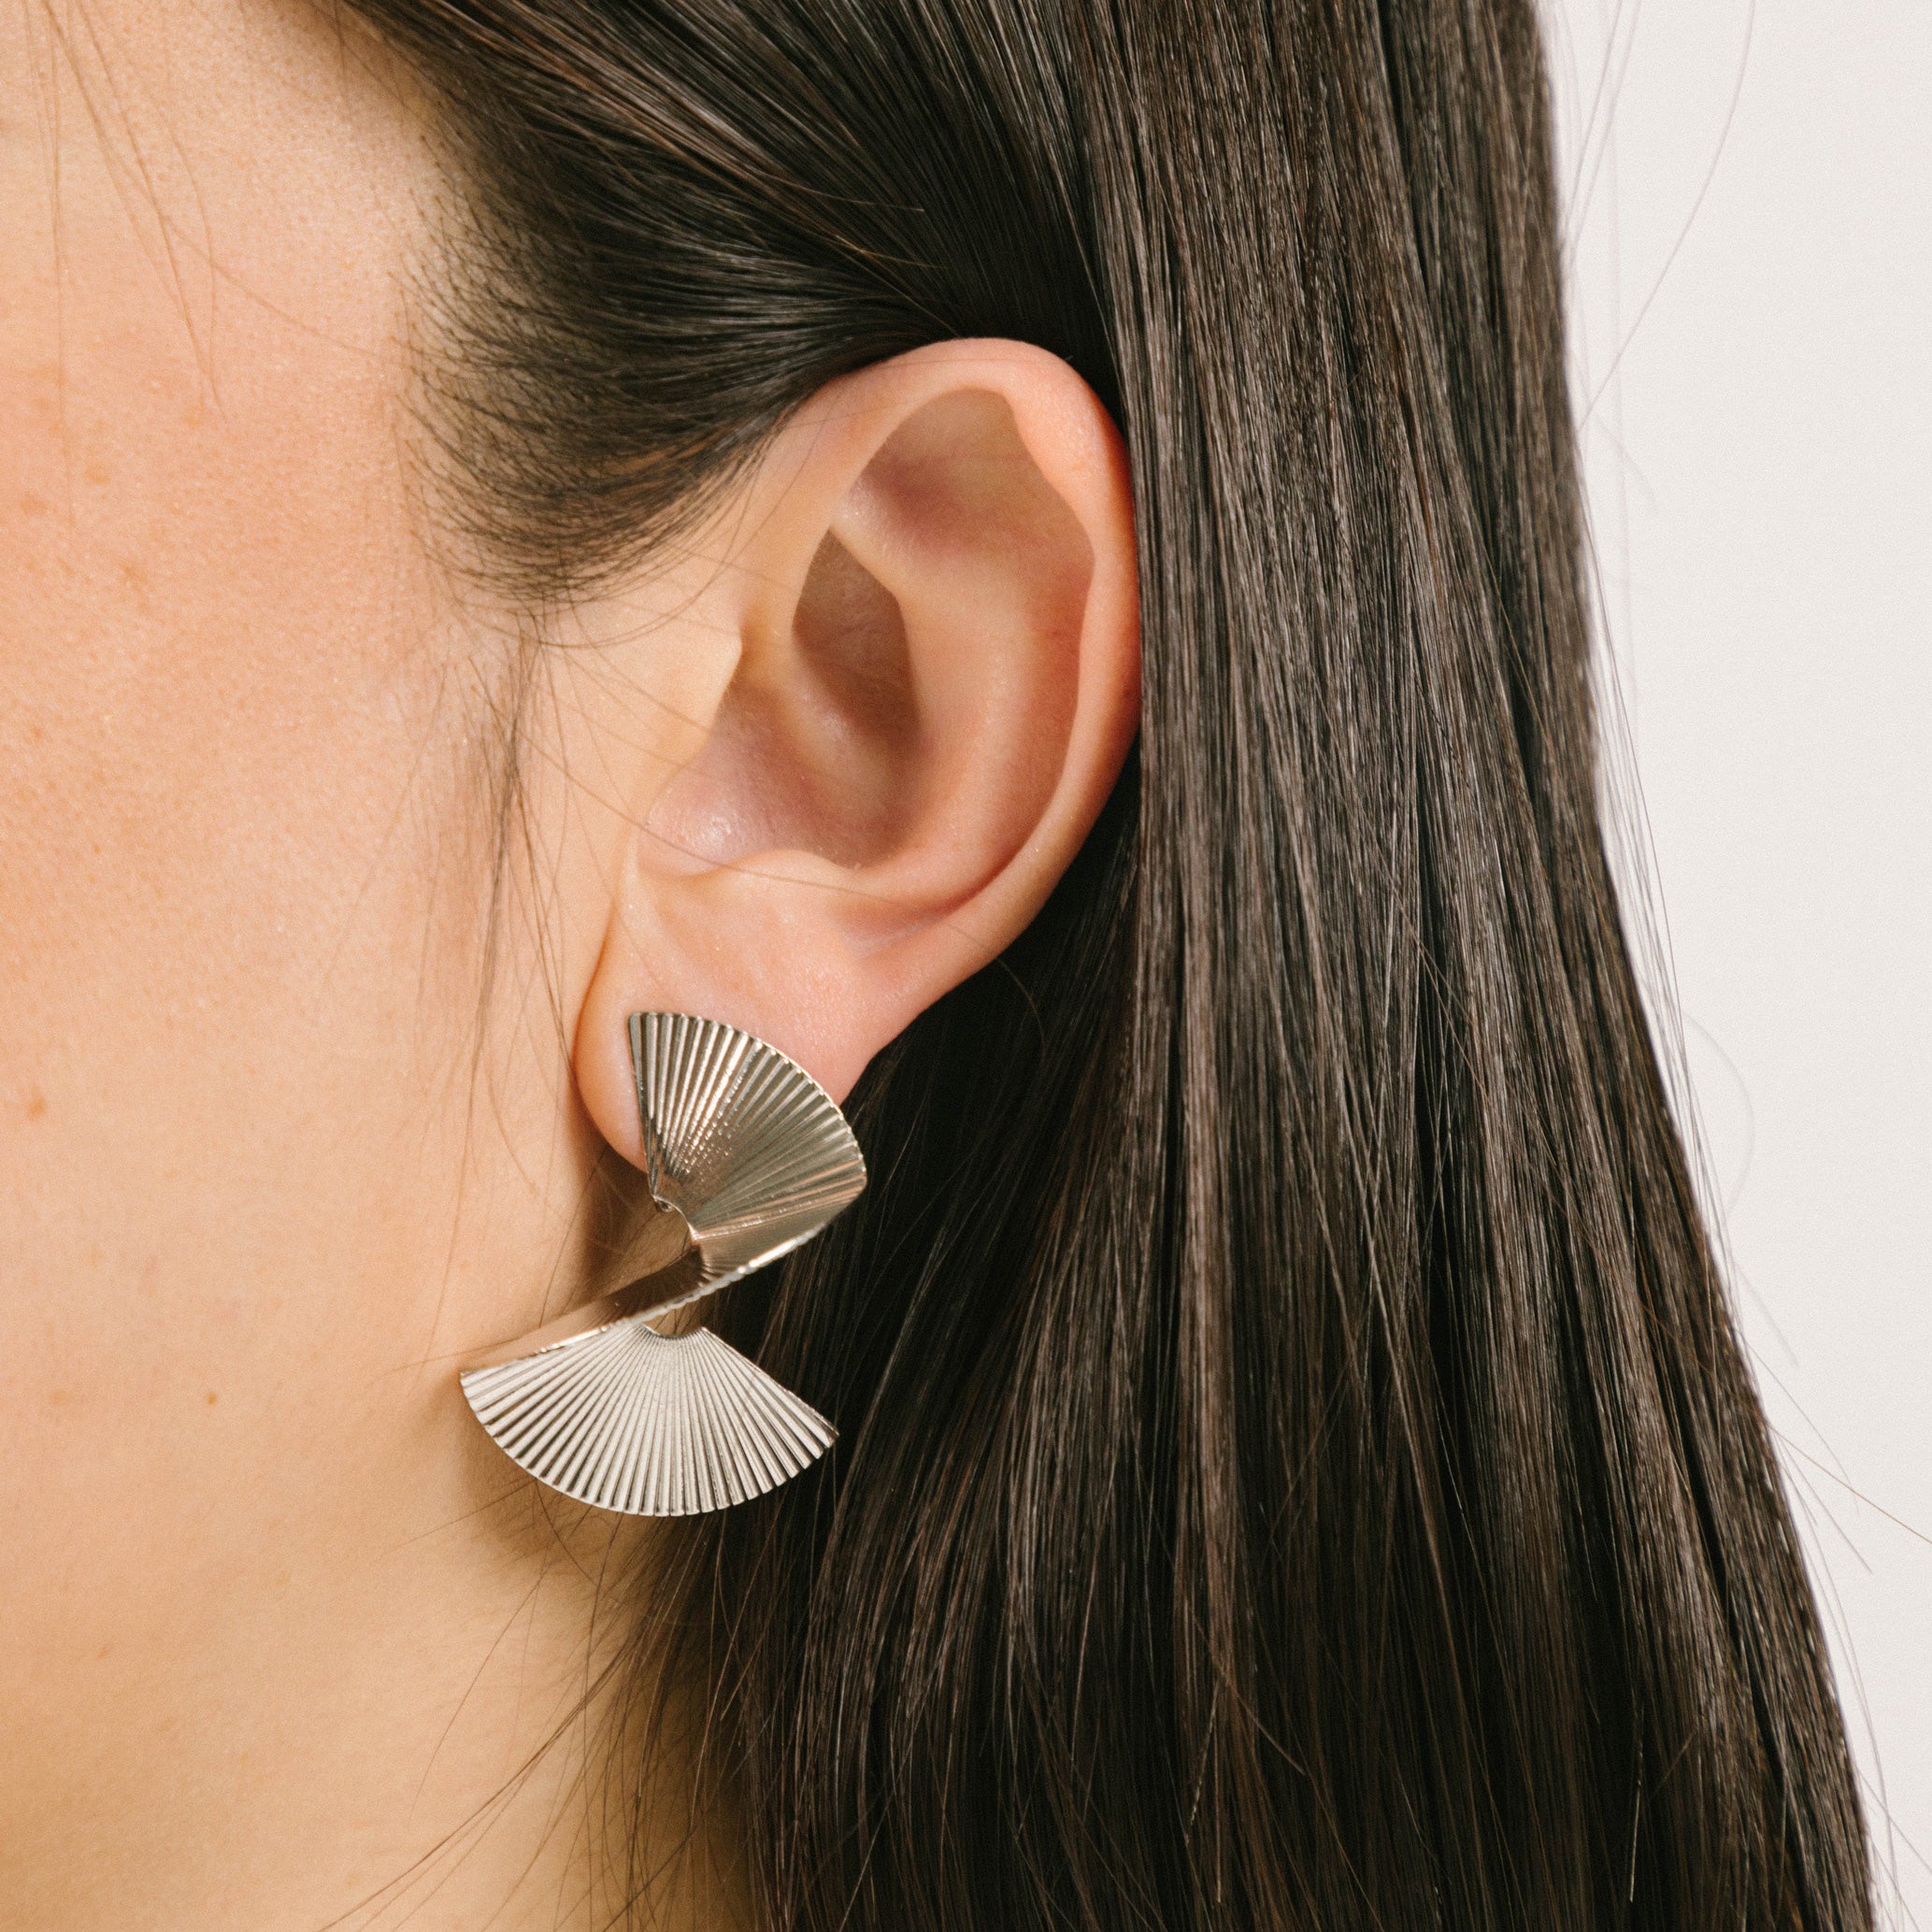 A model wearing the Ribbed Swirl Clip On Earrings in Silver feature a padded clip-on closure that can be worn comfortably for 8-12 hours. Made with silver tone copper alloy, these earrings provide a secure hold that can be adjusted to fit all ear types, such as thick/large, sensitive, small/thin, and stretched/healing. Please note, item is sold as one pair.